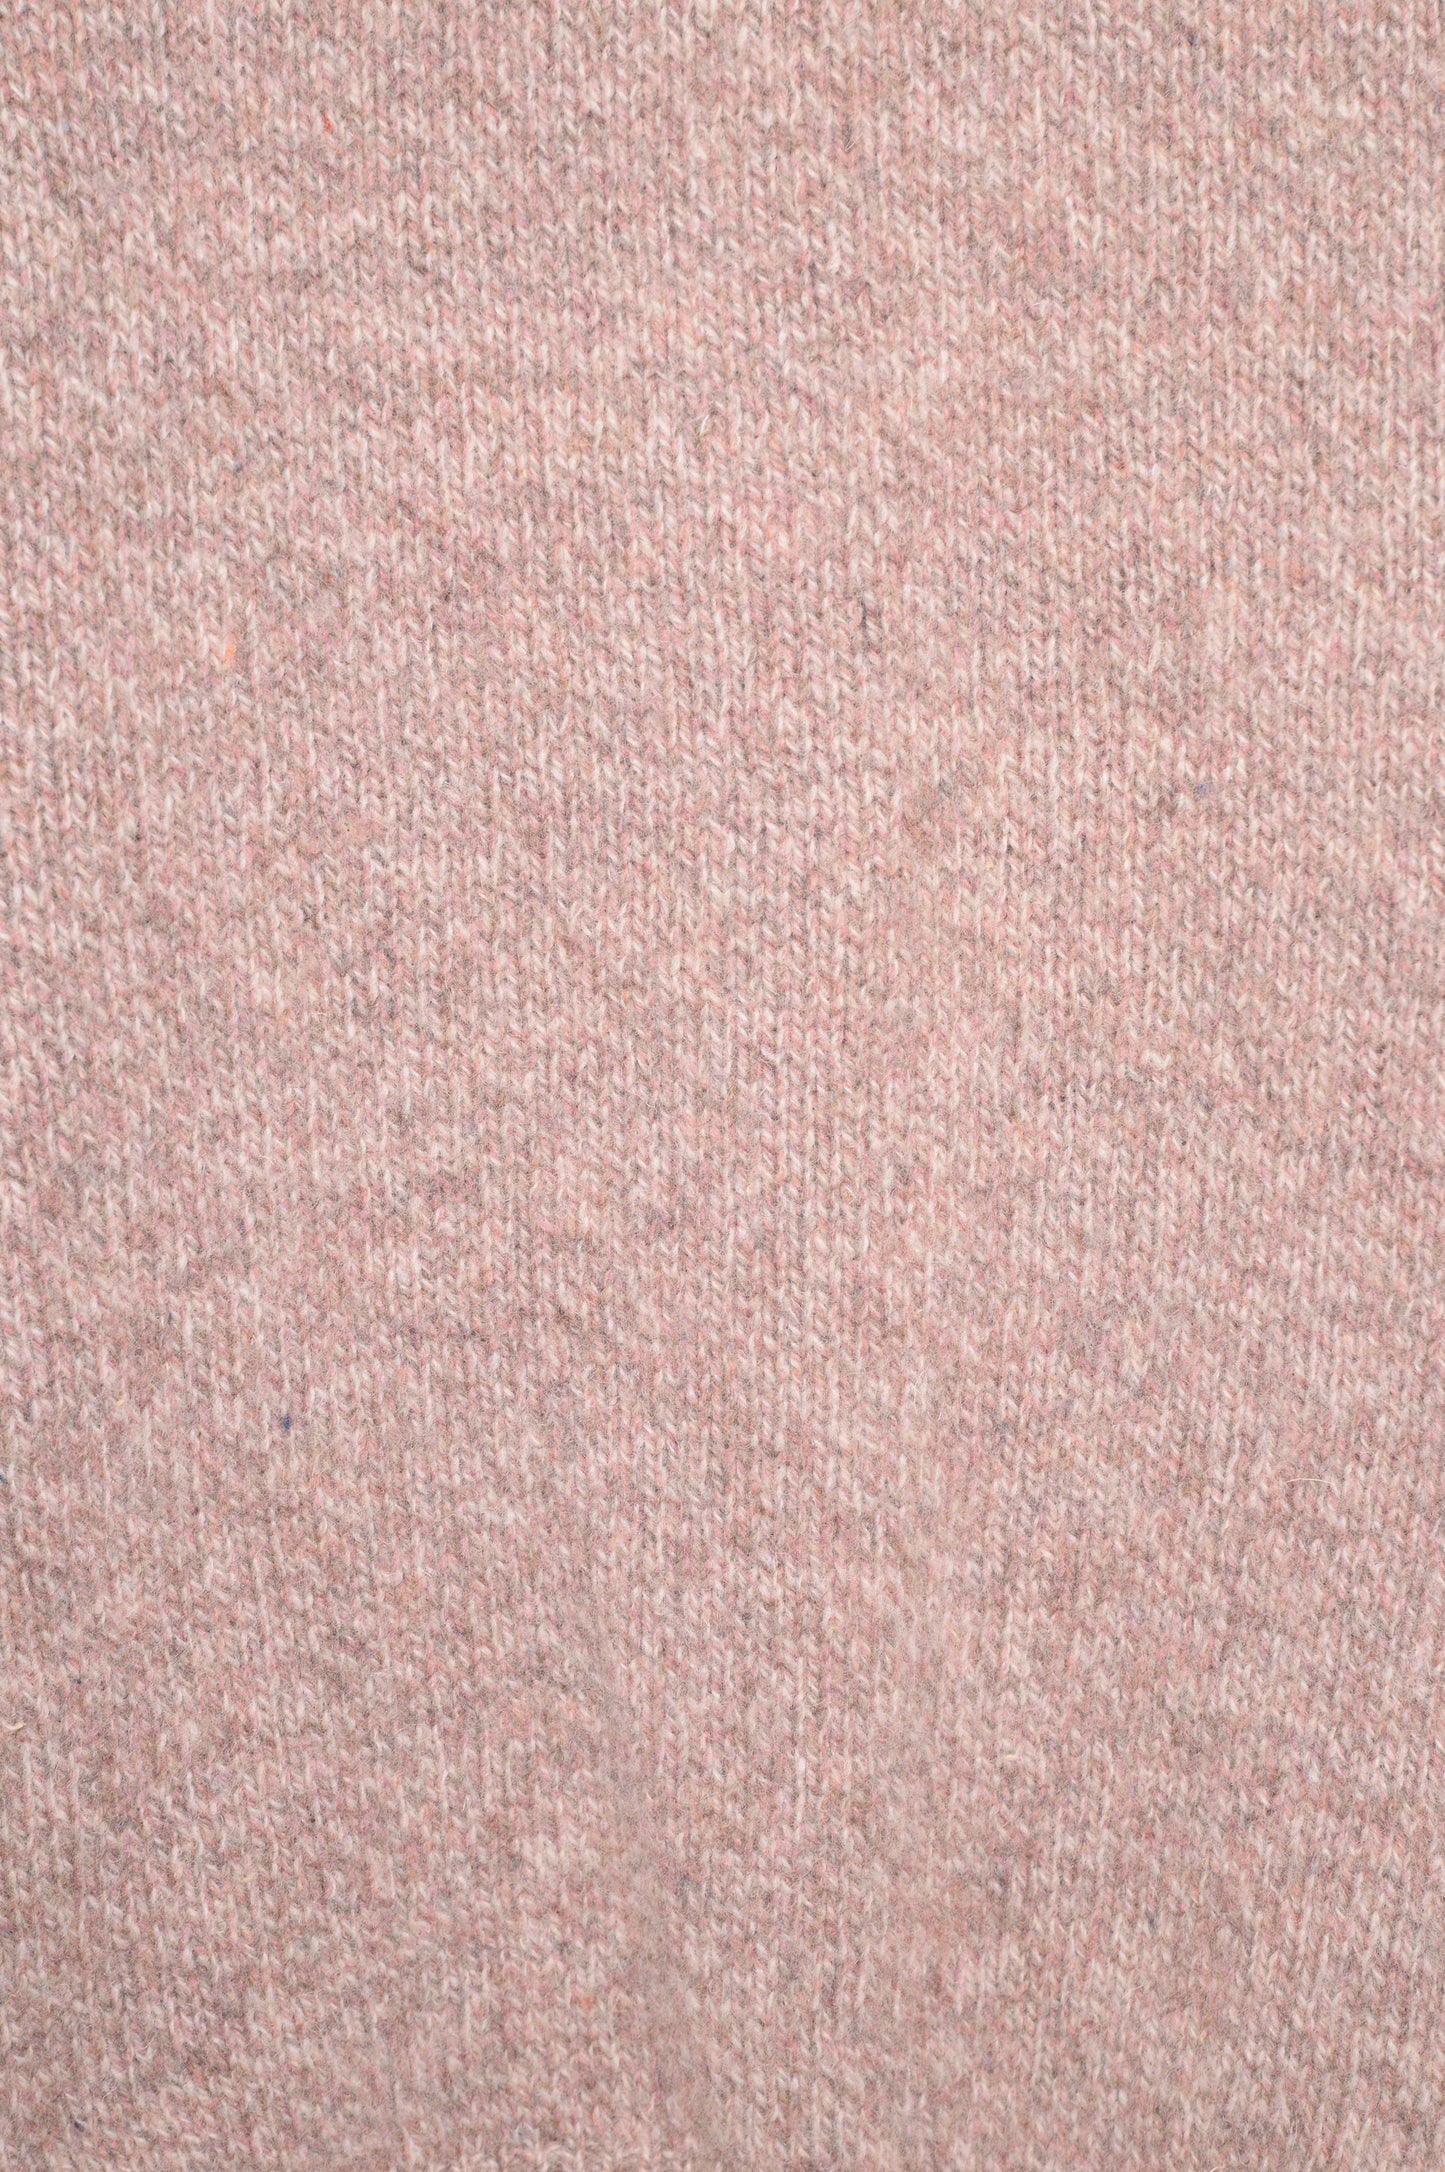 Marled Baby Pink Sweater